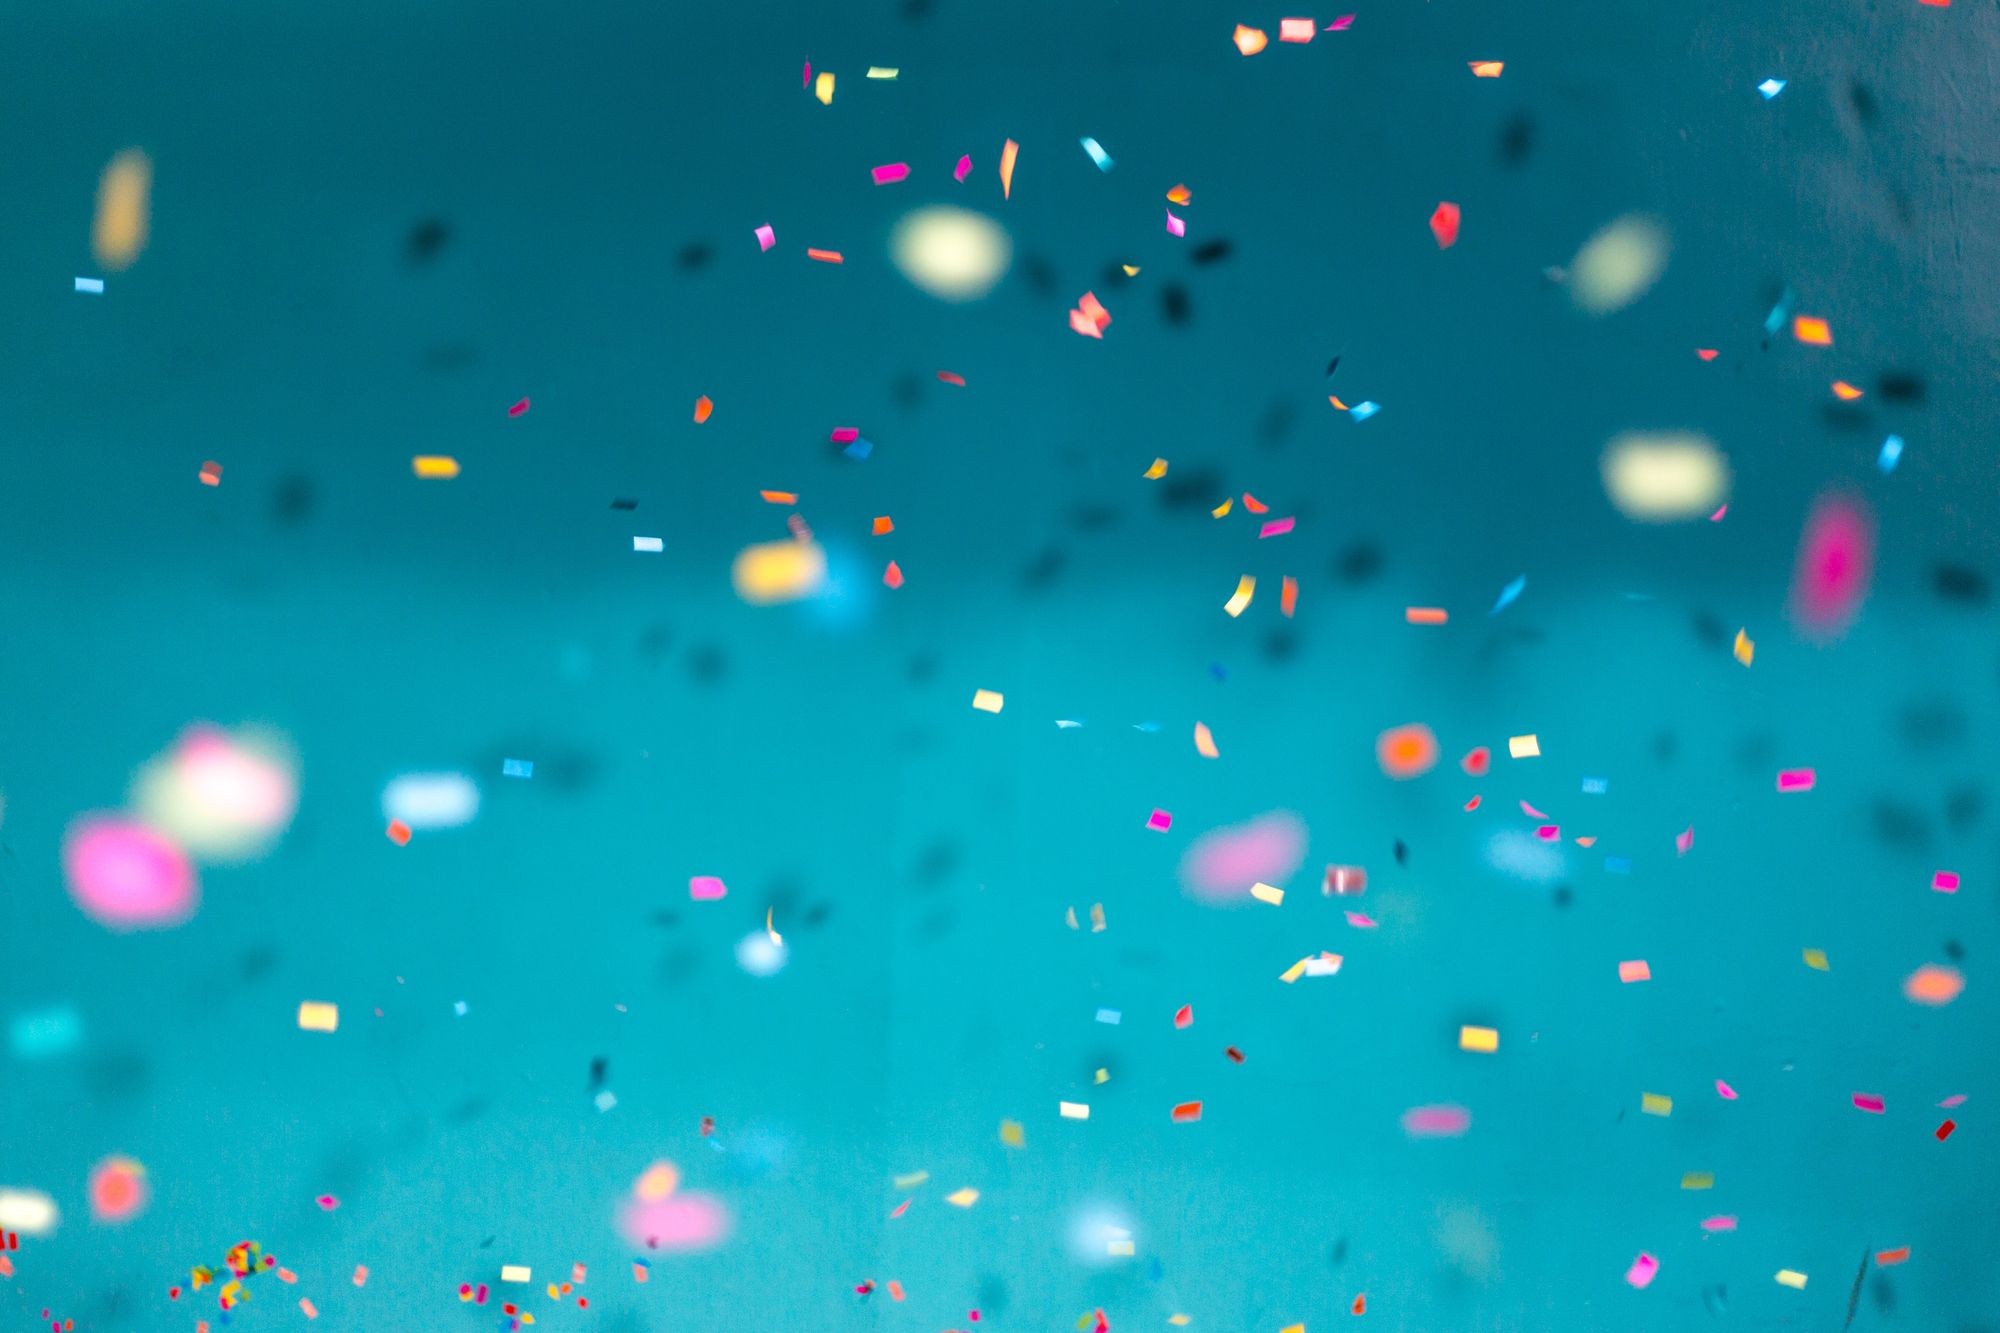 Colurful confetti falling down with a teal background.